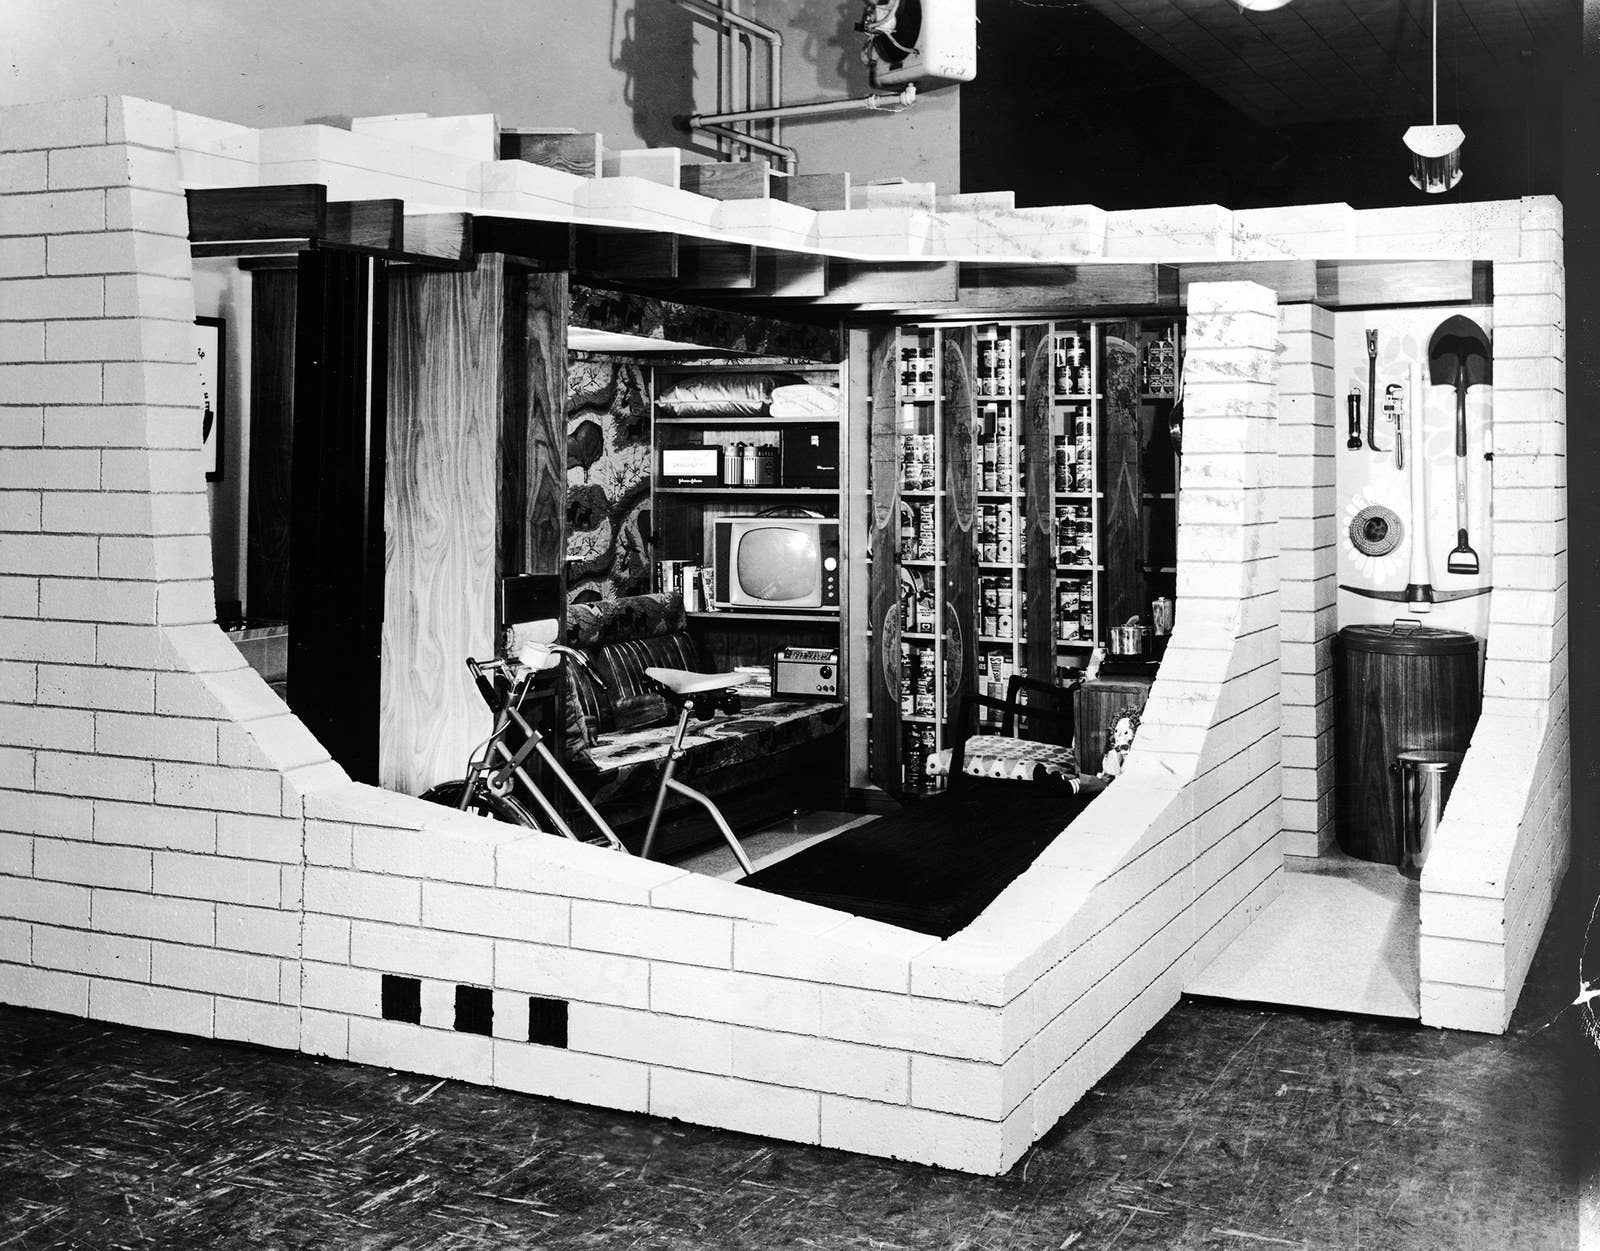 A cutaway display of a concrete masonry basement fallout shelter reveals an exercise bike, television, and library in the 1950s.